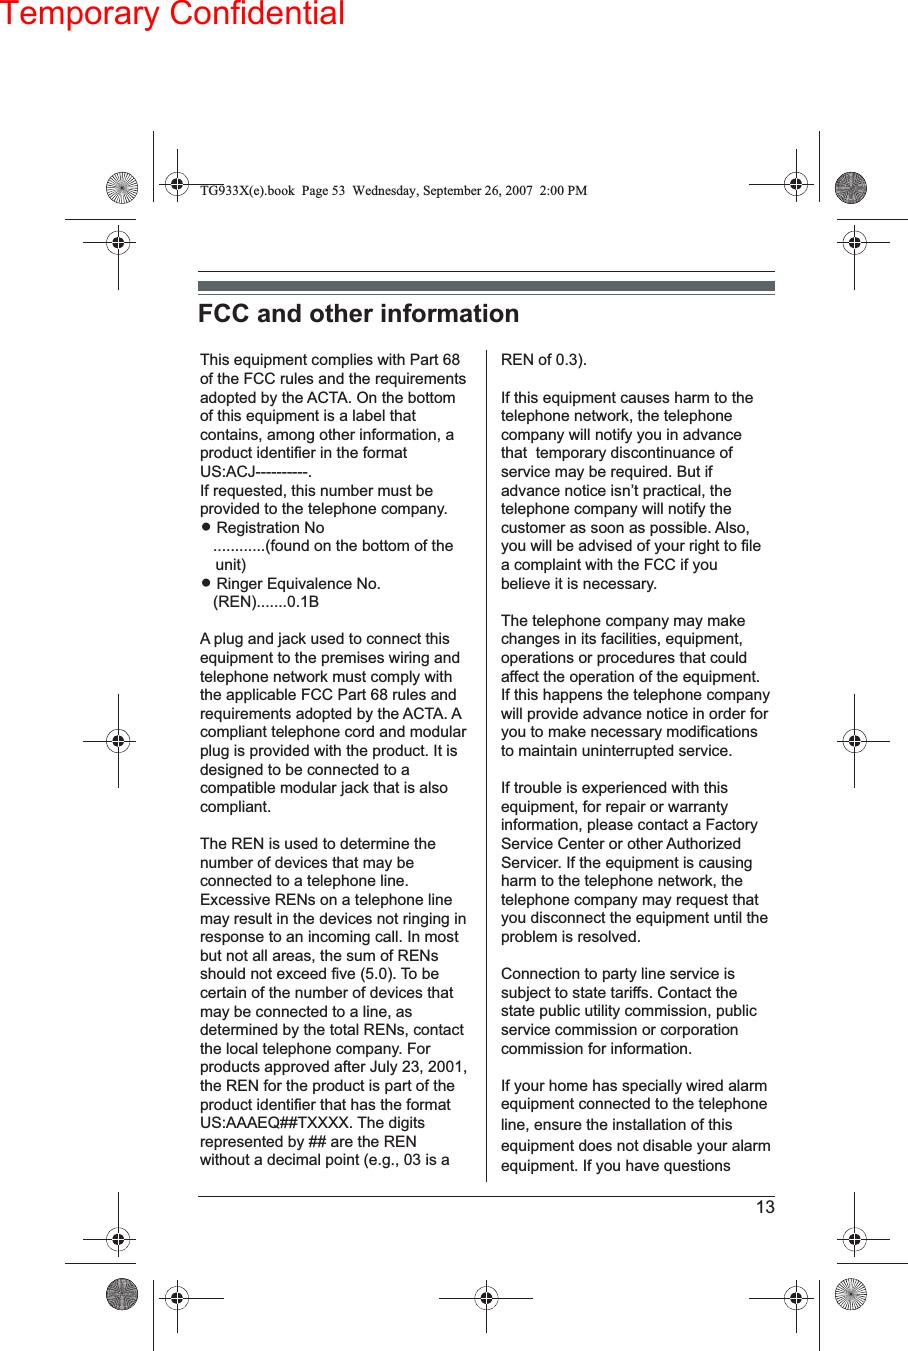 Temporary Confidential13FCC and other informationThis equipment complies with Part 68 of the FCC rules and the requirements adopted by the ACTA. On the bottom of this equipment is a label that contains, among other information, a product identifier in the format US:ACJ----------.If requested, this number must be provided to the telephone company.L Registration No   ............(found on the bottom of the unit)L Ringer Equivalence No.   (REN).......0.1BA plug and jack used to connect this equipment to the premises wiring and telephone network must comply with the applicable FCC Part 68 rules and requirements adopted by the ACTA. Acompliant telephone cord and modular plug is provided with the product. It is designed to be connected to a compatible modular jack that is also compliant.The REN is used to determine the number of devices that may be connected to a telephone line. Excessive RENs on a telephone line may result in the devices not ringing in response to an incoming call. In most but not all areas, the sum of RENs should not exceed five (5.0). To be certain of the number of devices that may be connected to a line, as determined by the total RENs, contact the local telephone company. For products approved after July 23, 2001, the REN for the product is part of the product identifier that has the format US:AAAEQ##TXXXX. The digitsrepresented by ## are the REN without a decimal point (e.g., 03 is a REN of 0.3).If this equipment causes harm to the telephone network, the telephone company will notify you in advance that  temporary discontinuance of service may be required. But if advance notice isn’t practical, the telephone company will notify the customer as soon as possible. Also,you will be advised of your right to file a complaint with the FCC if you believe it is necessary.The telephone company may make changes in its facilities, equipment, operations or procedures that could affect the operation of the equipment. If this happens the telephone company will provide advance notice in order for you to make necessary modifications to maintain uninterrupted service.If trouble is experienced with this equipment, for repair or warranty information, please contact a Factory Service Center or other AuthorizedServicer. If the equipment is causing harm to the telephone network, the telephone company may request that you disconnect the equipment until the problem is resolved.Connection to party line service is subject to state tariffs. Contact the state public utility commission, public service commission or corporation commission for information.If your home has specially wired alarm equipment connected to the telephone line, ensure the installation of this equipment does not disable your alarm equipment. If you have questions TG933X(e).book  Page 53  Wednesday, September 26, 2007 2:00 PM